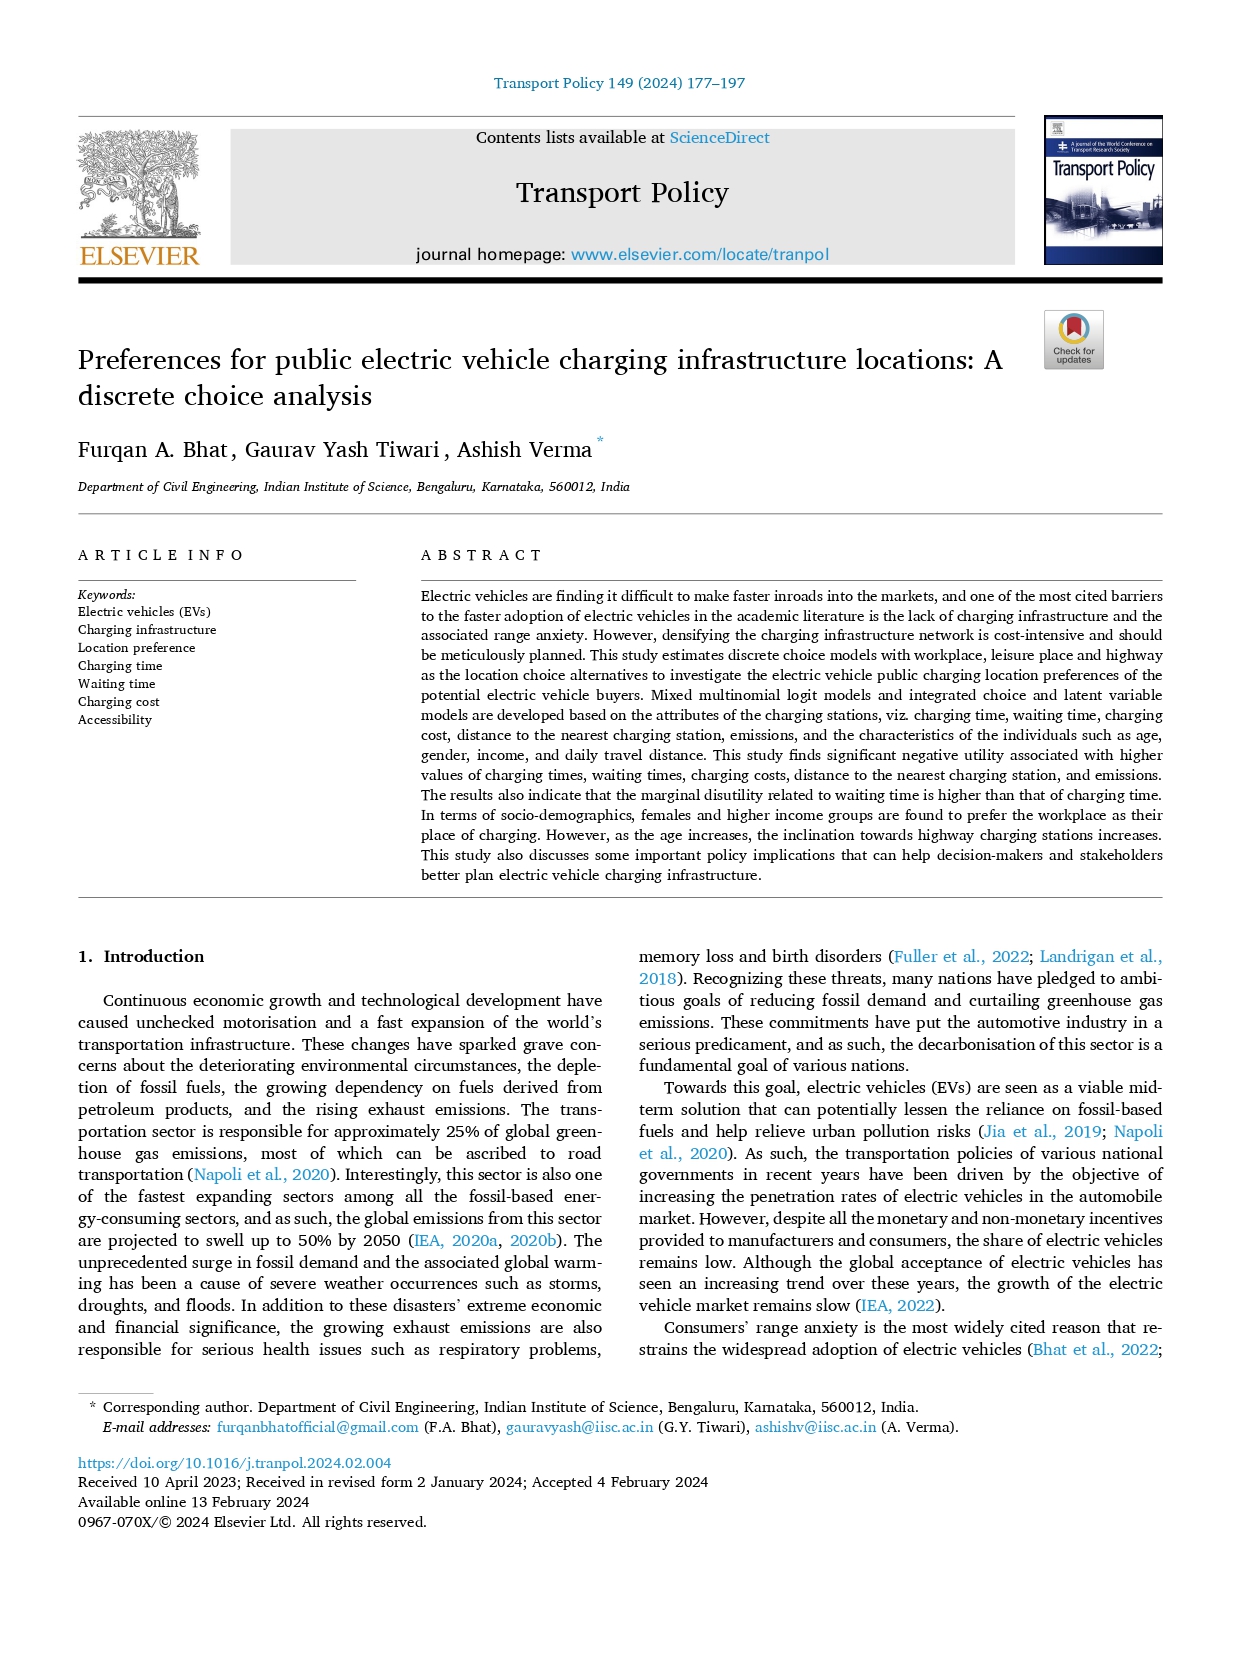 Preferences for public electric vehicle charging infrastructure locations: A discrete choice analysis